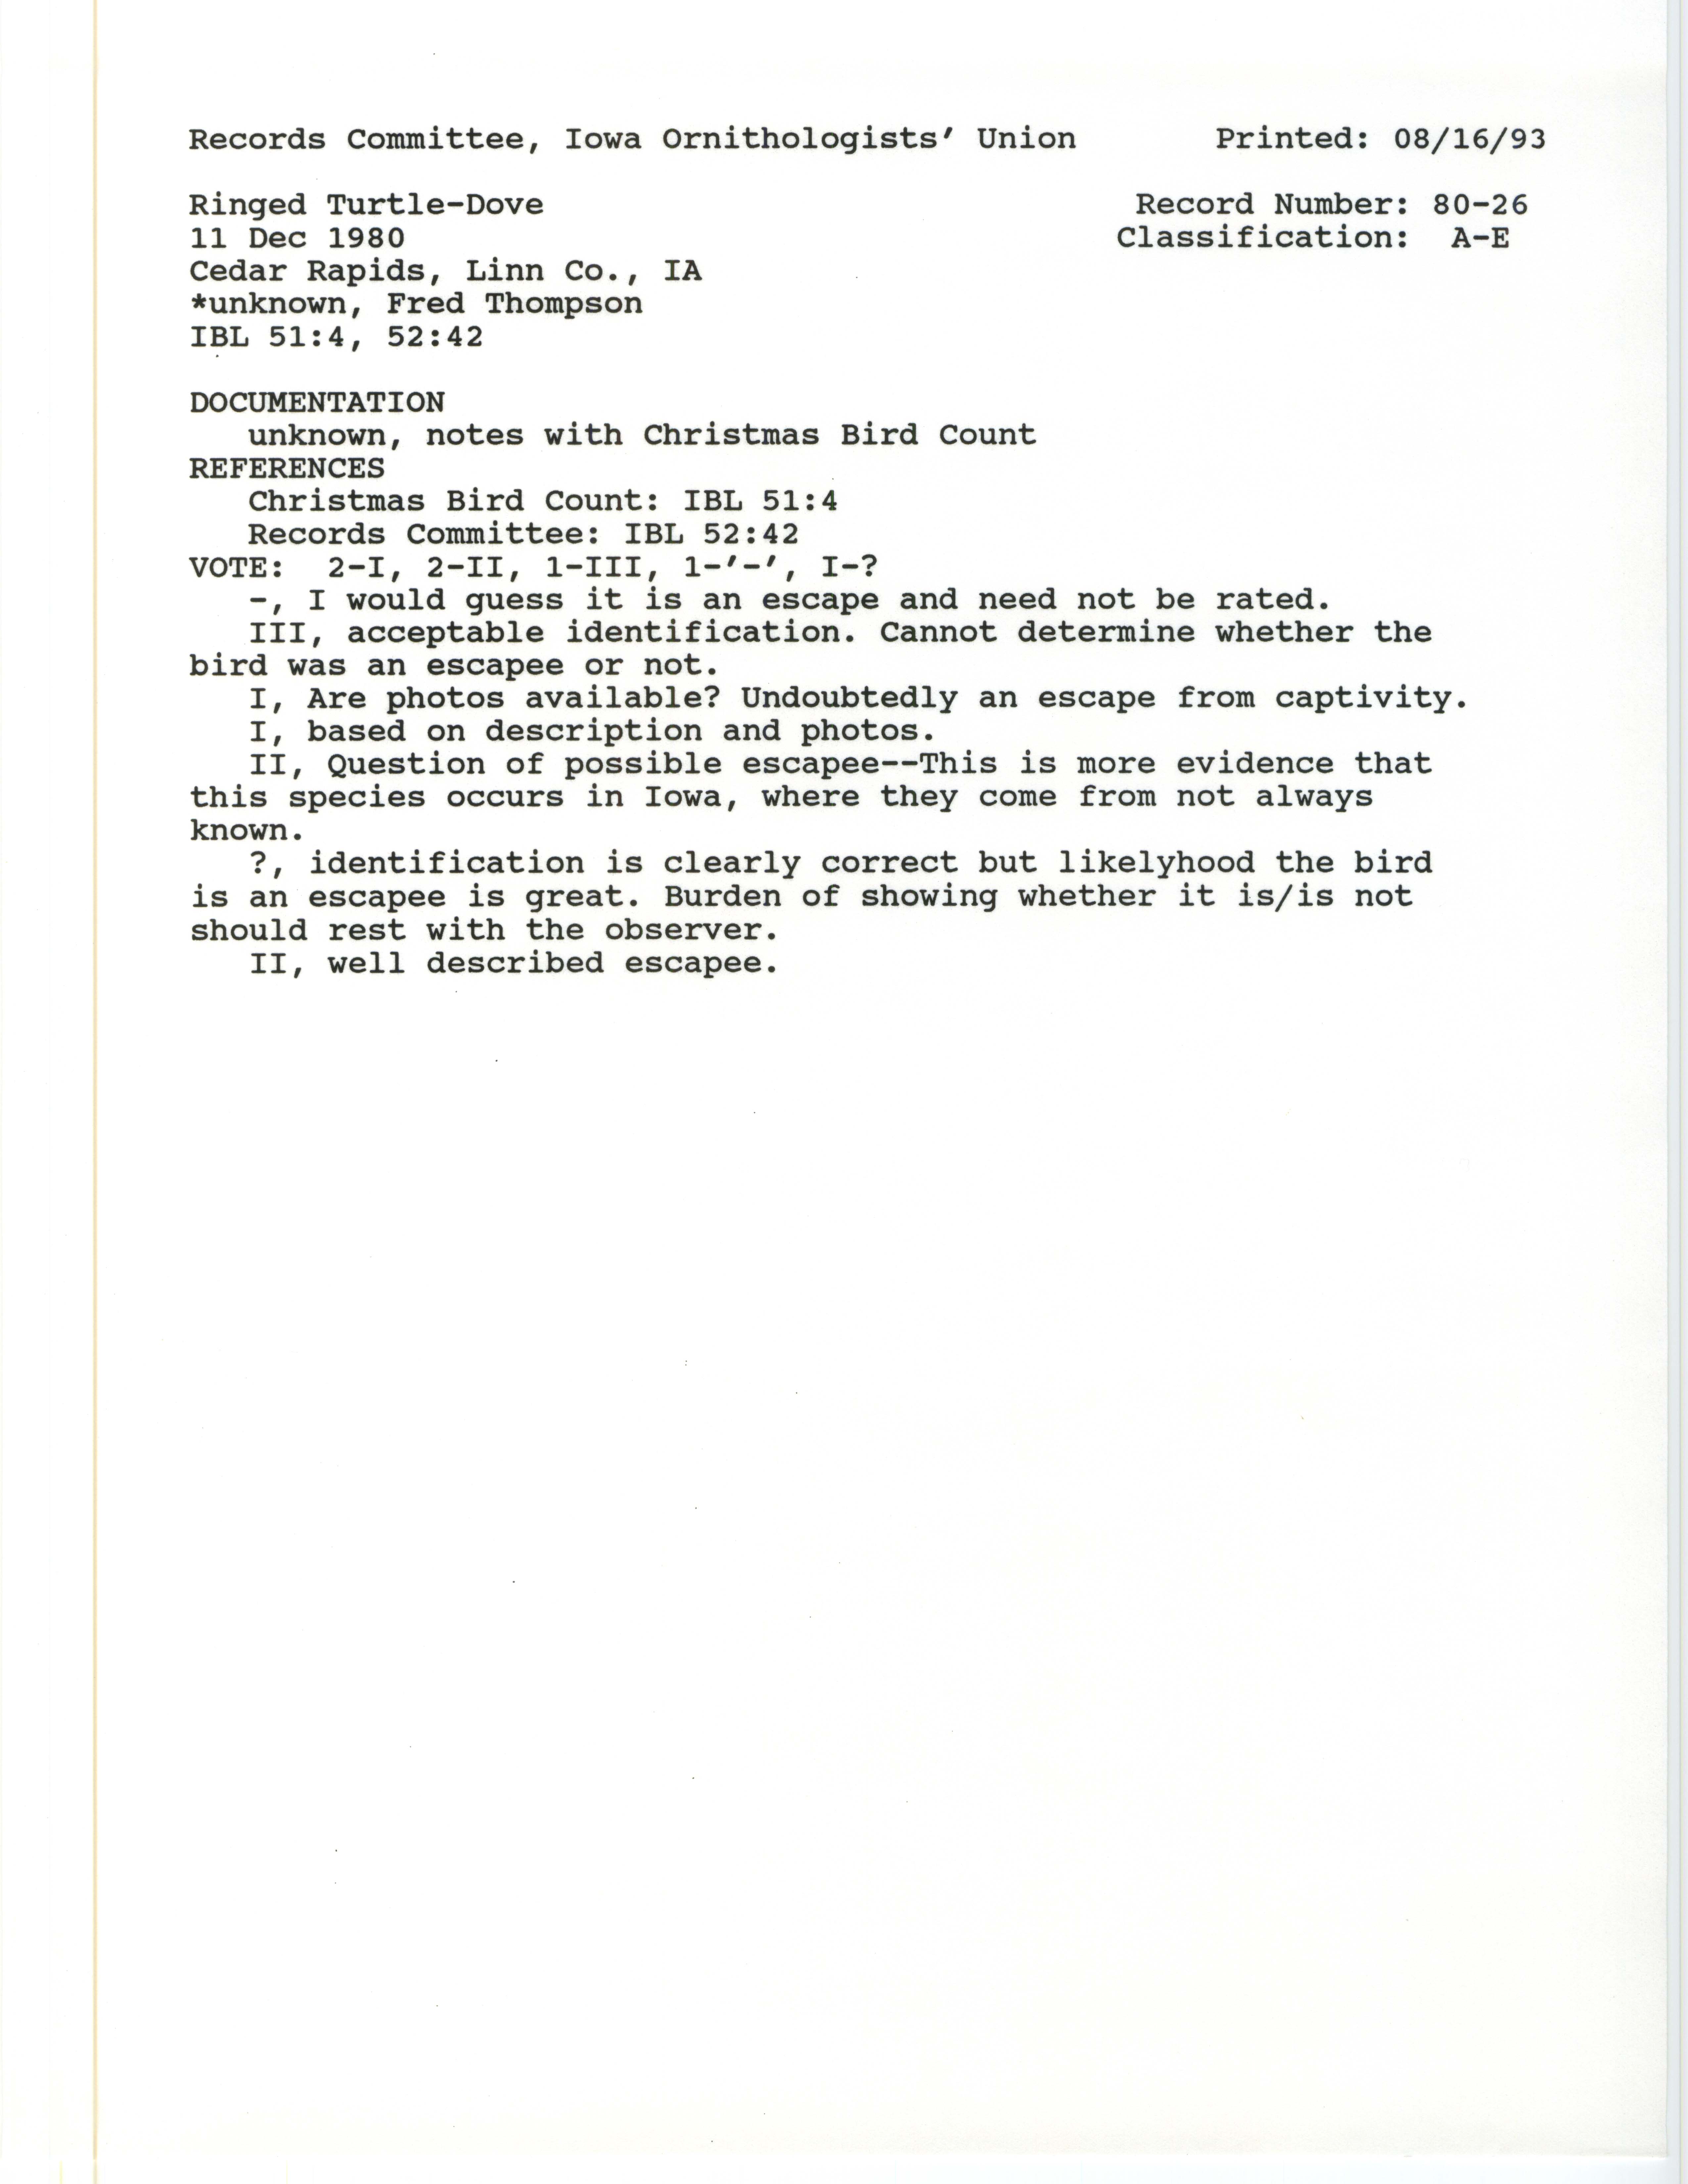 Records Committee review for rare bird sighting for Ringed Turtle-Dove at Cedar Rapids in 1980